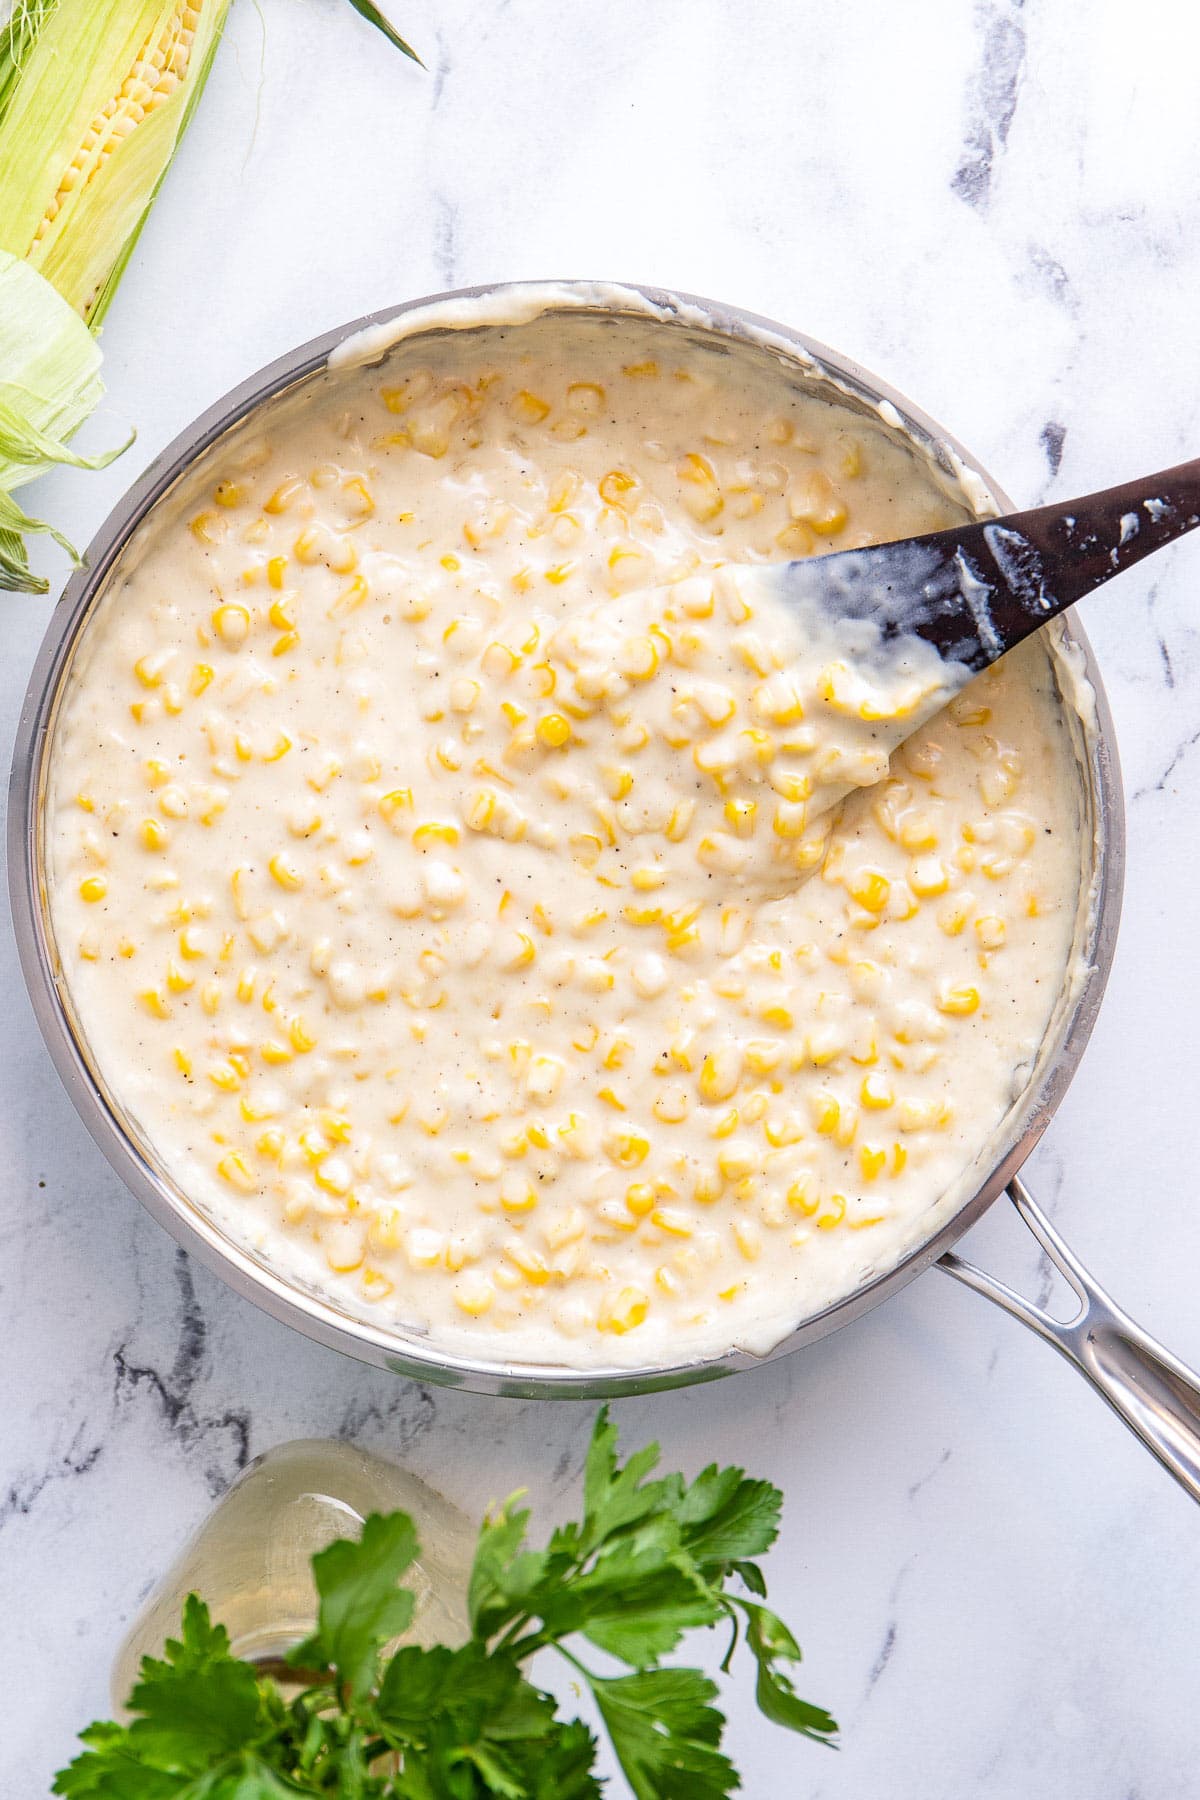 Creamed corn in a stainless steel skillet with corn on the cob and fresh parlsey on the side.